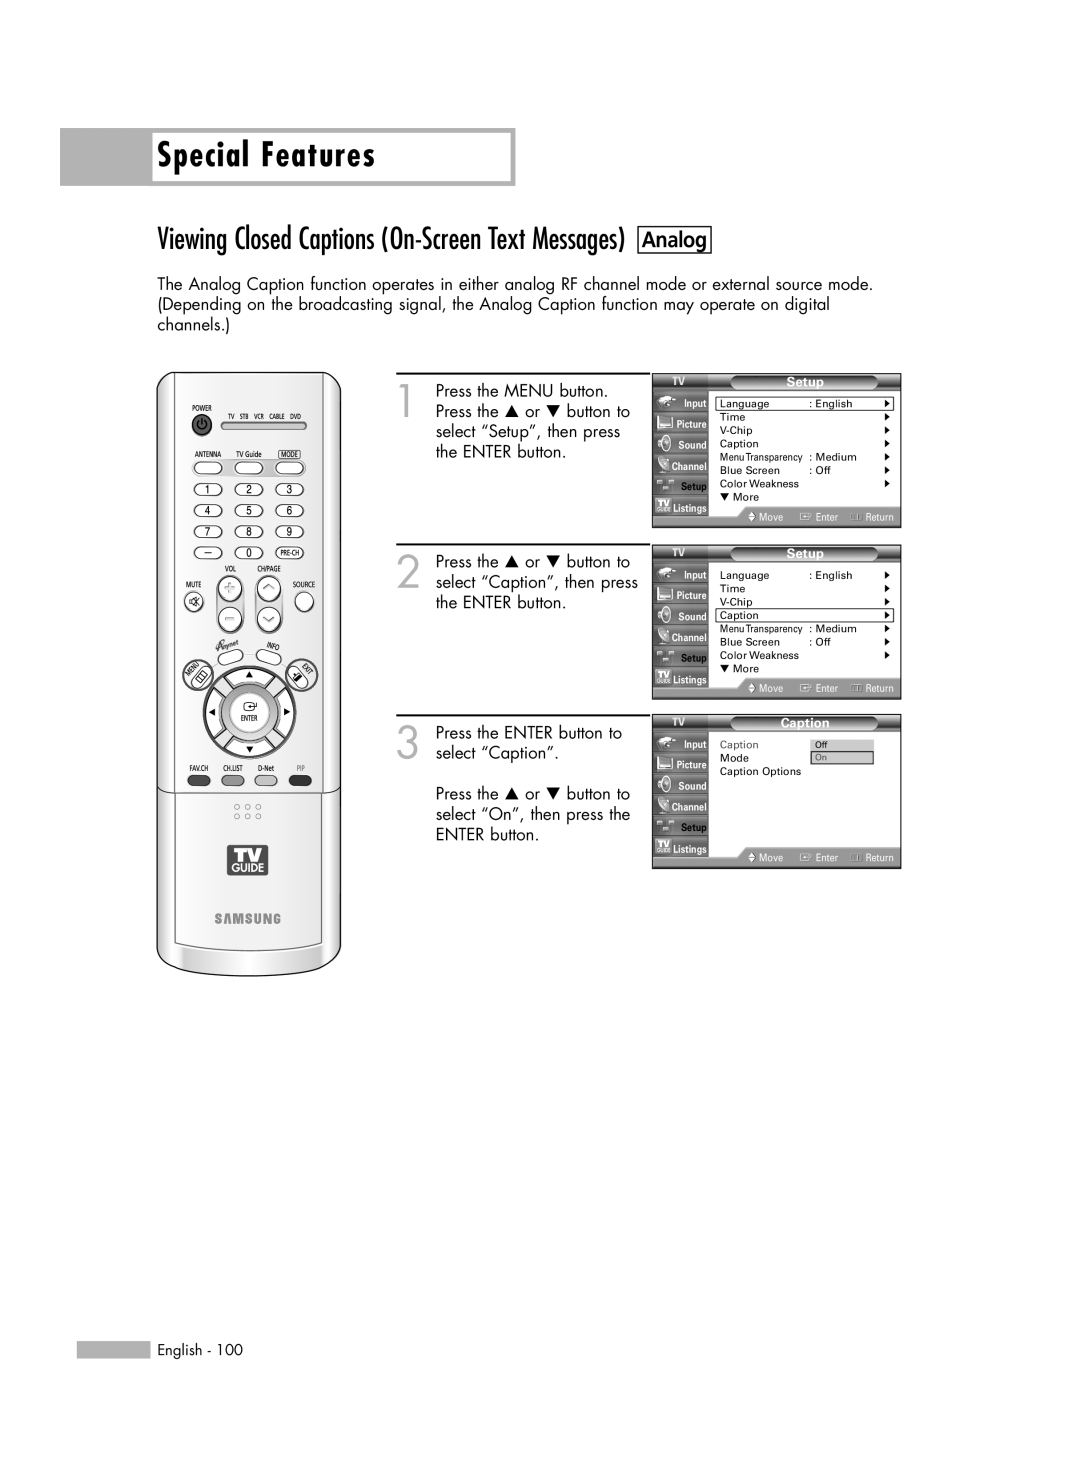 Samsung HL-R5678W, HL-R6178W, HL-R7178W manual Special Features, Analog, Viewing Closed Captions On-ScreenText Messages 